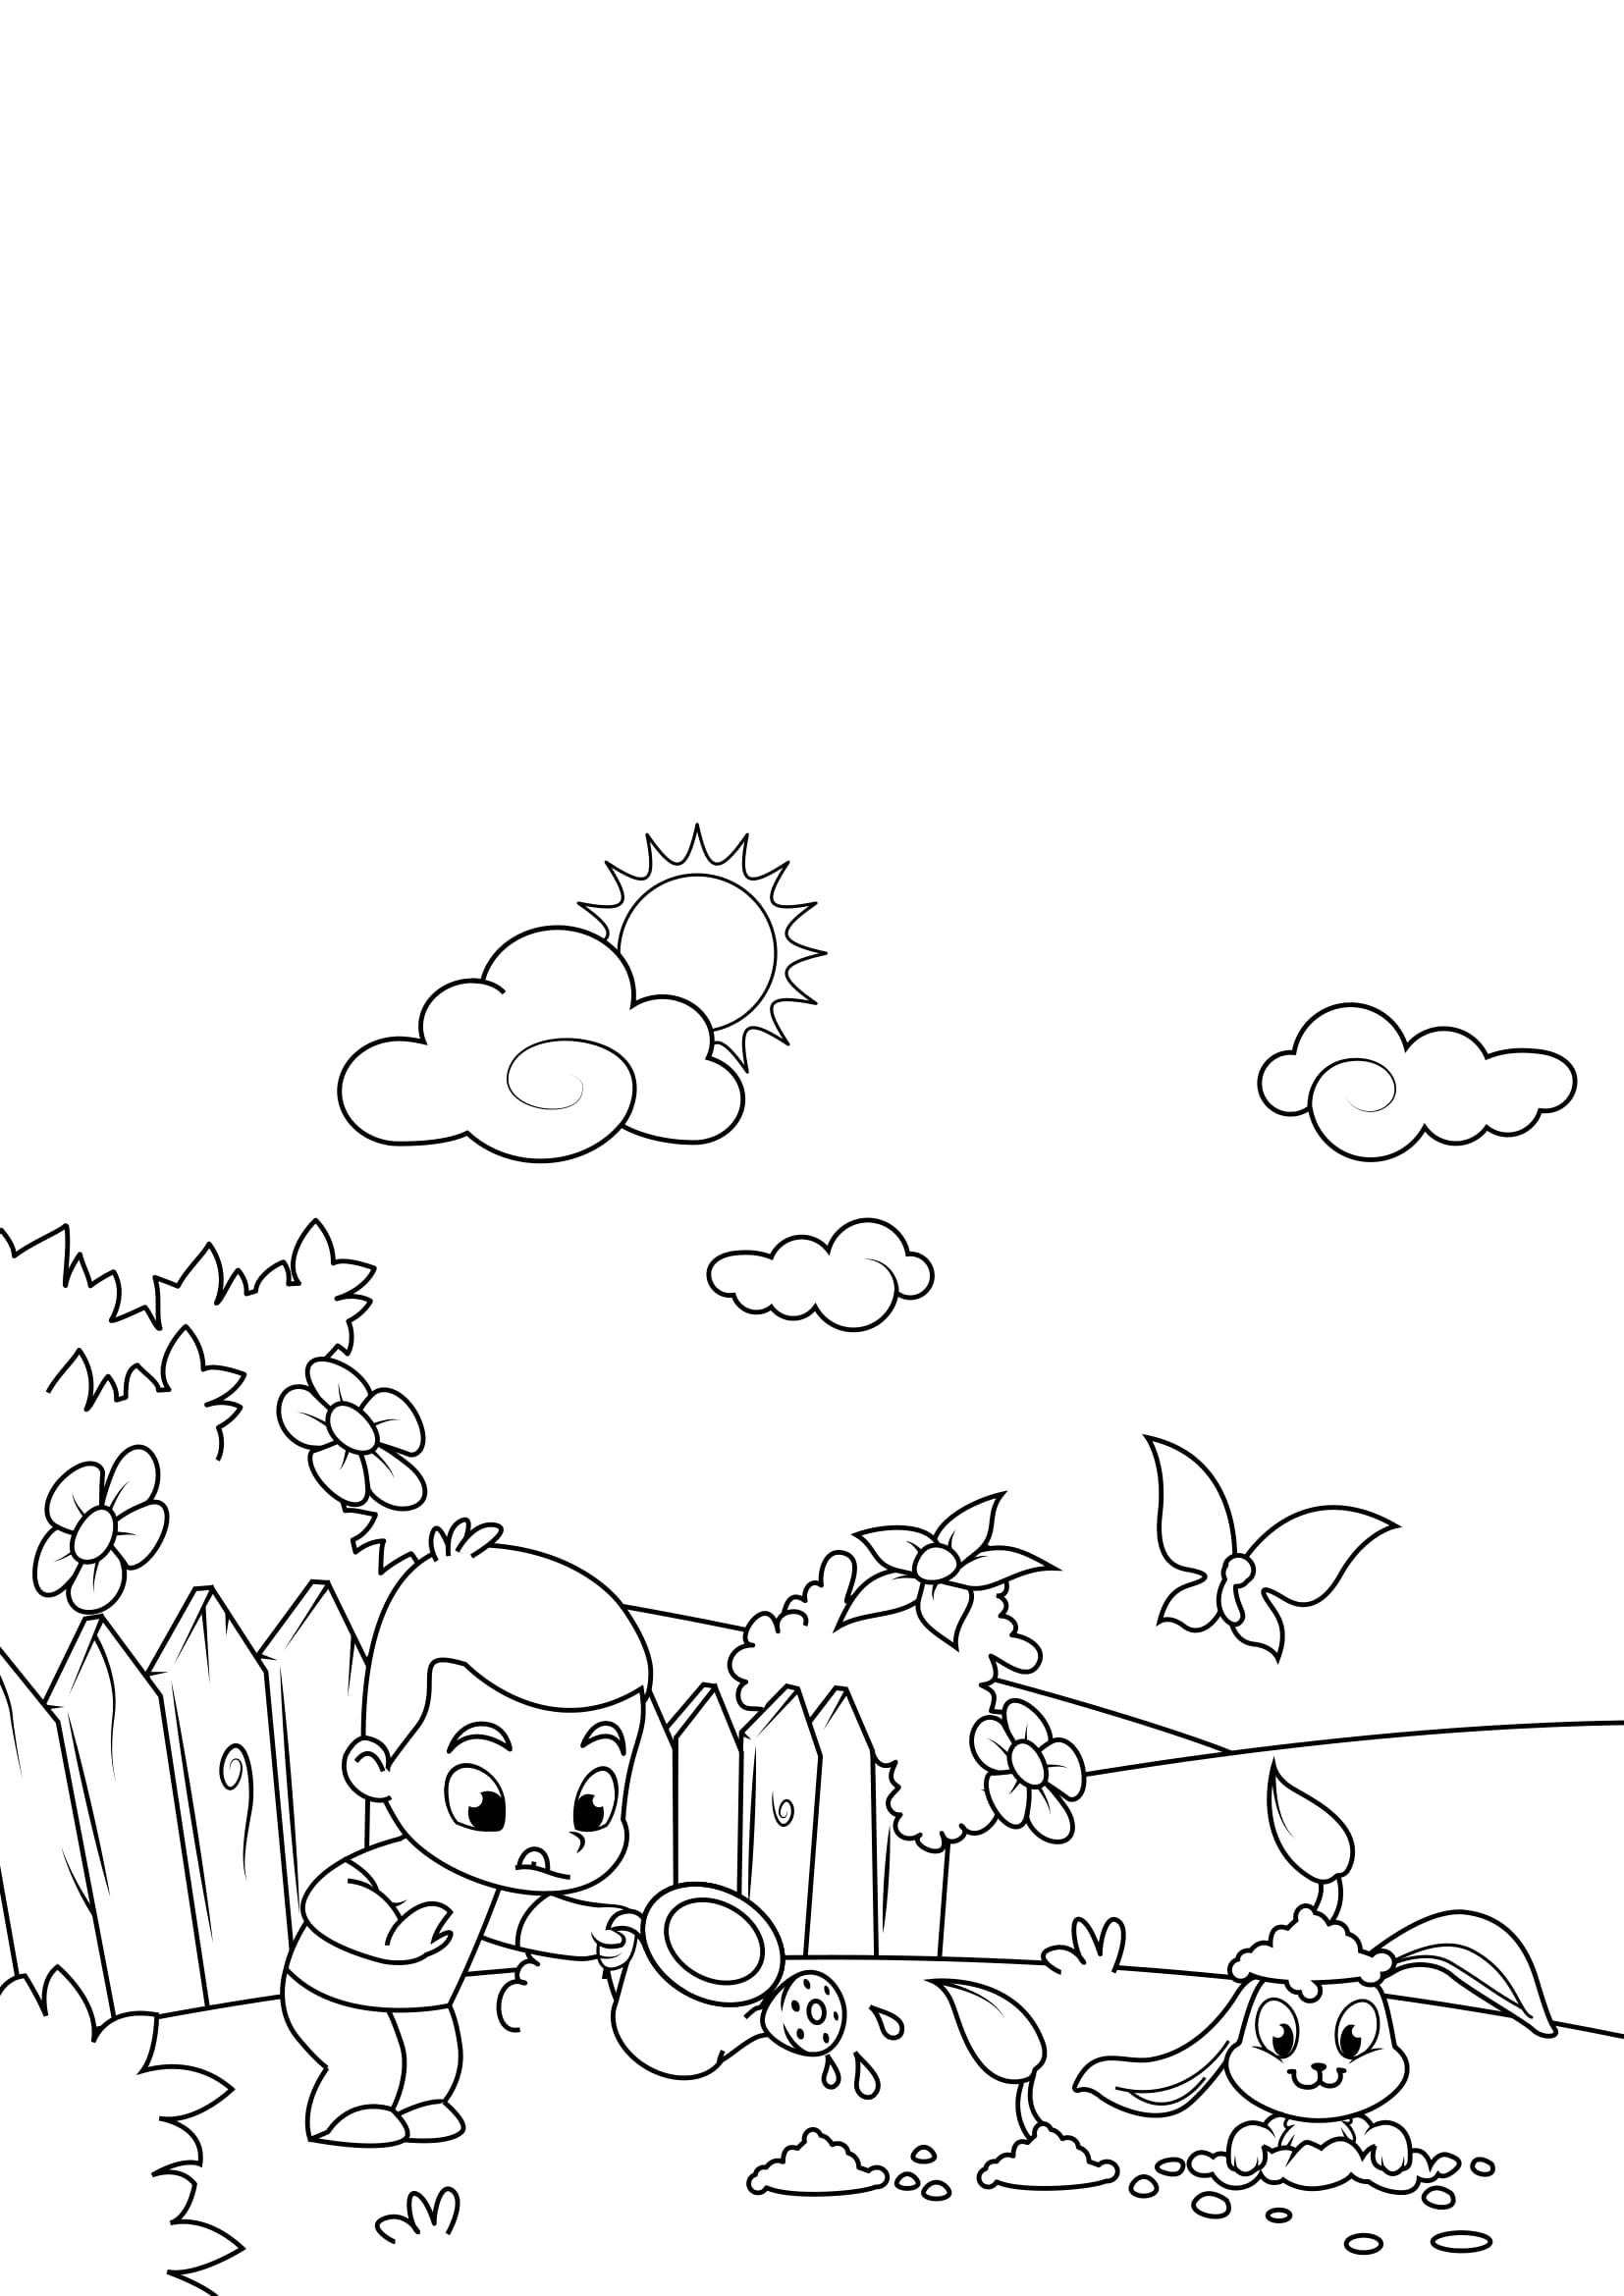 Coloring page spring, work in the garden